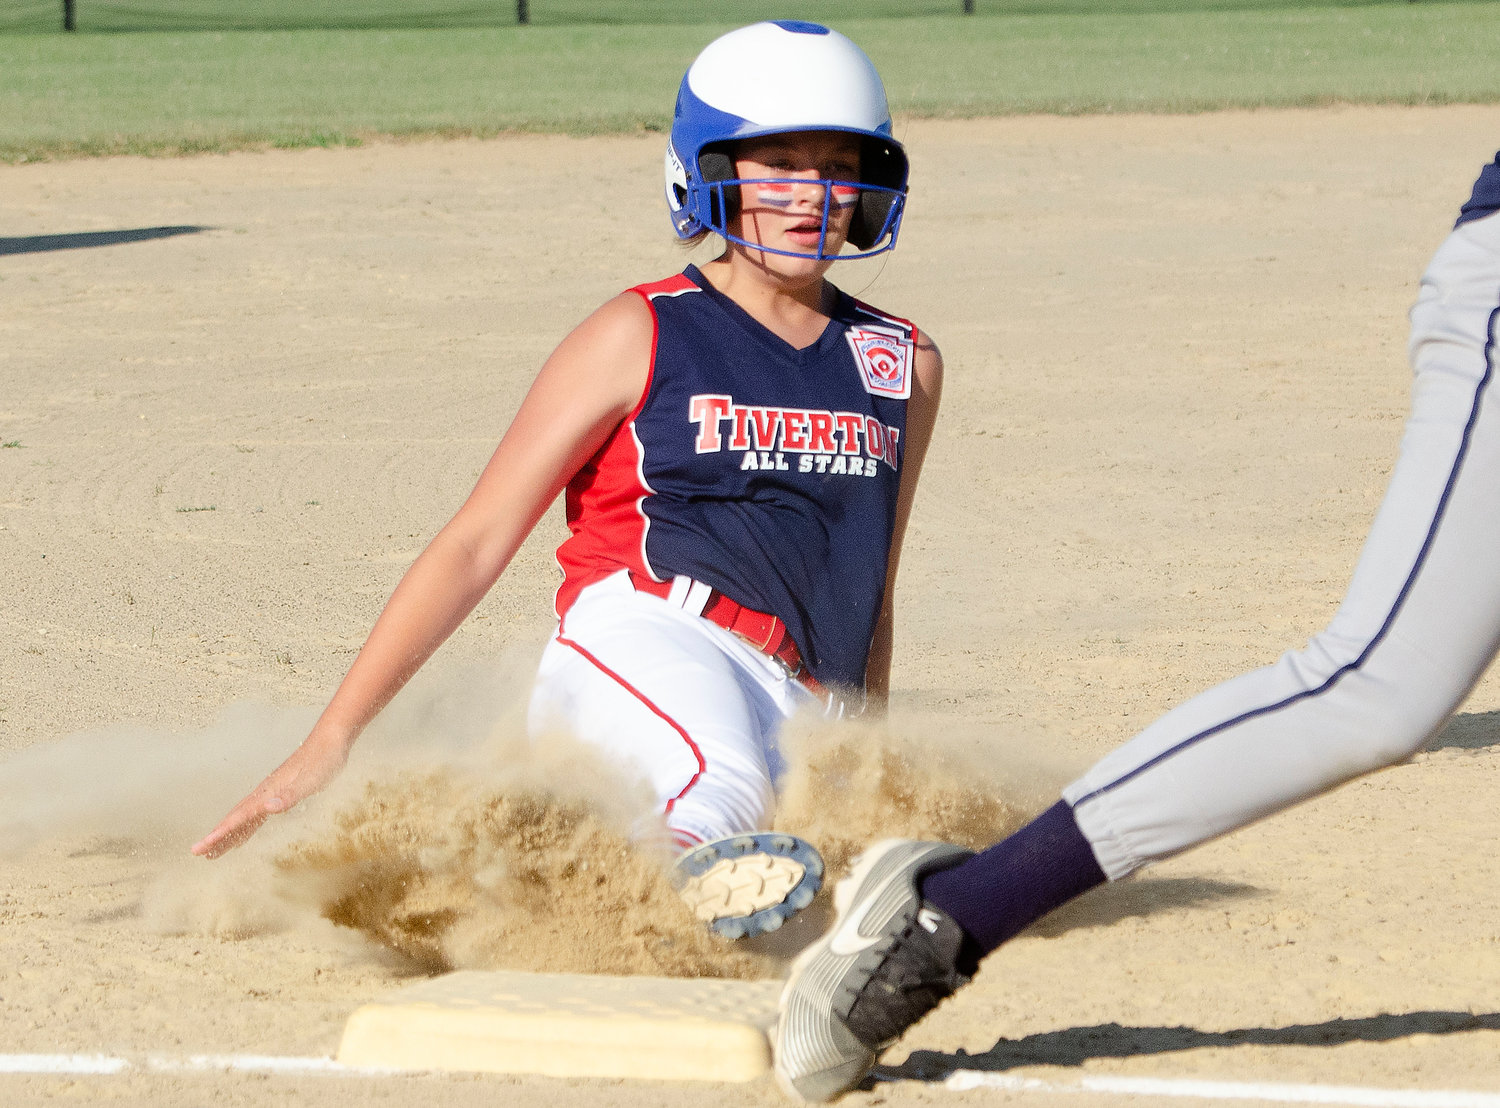 Brooke Sowa slides into third base safely in the first inning against South Kingstown.